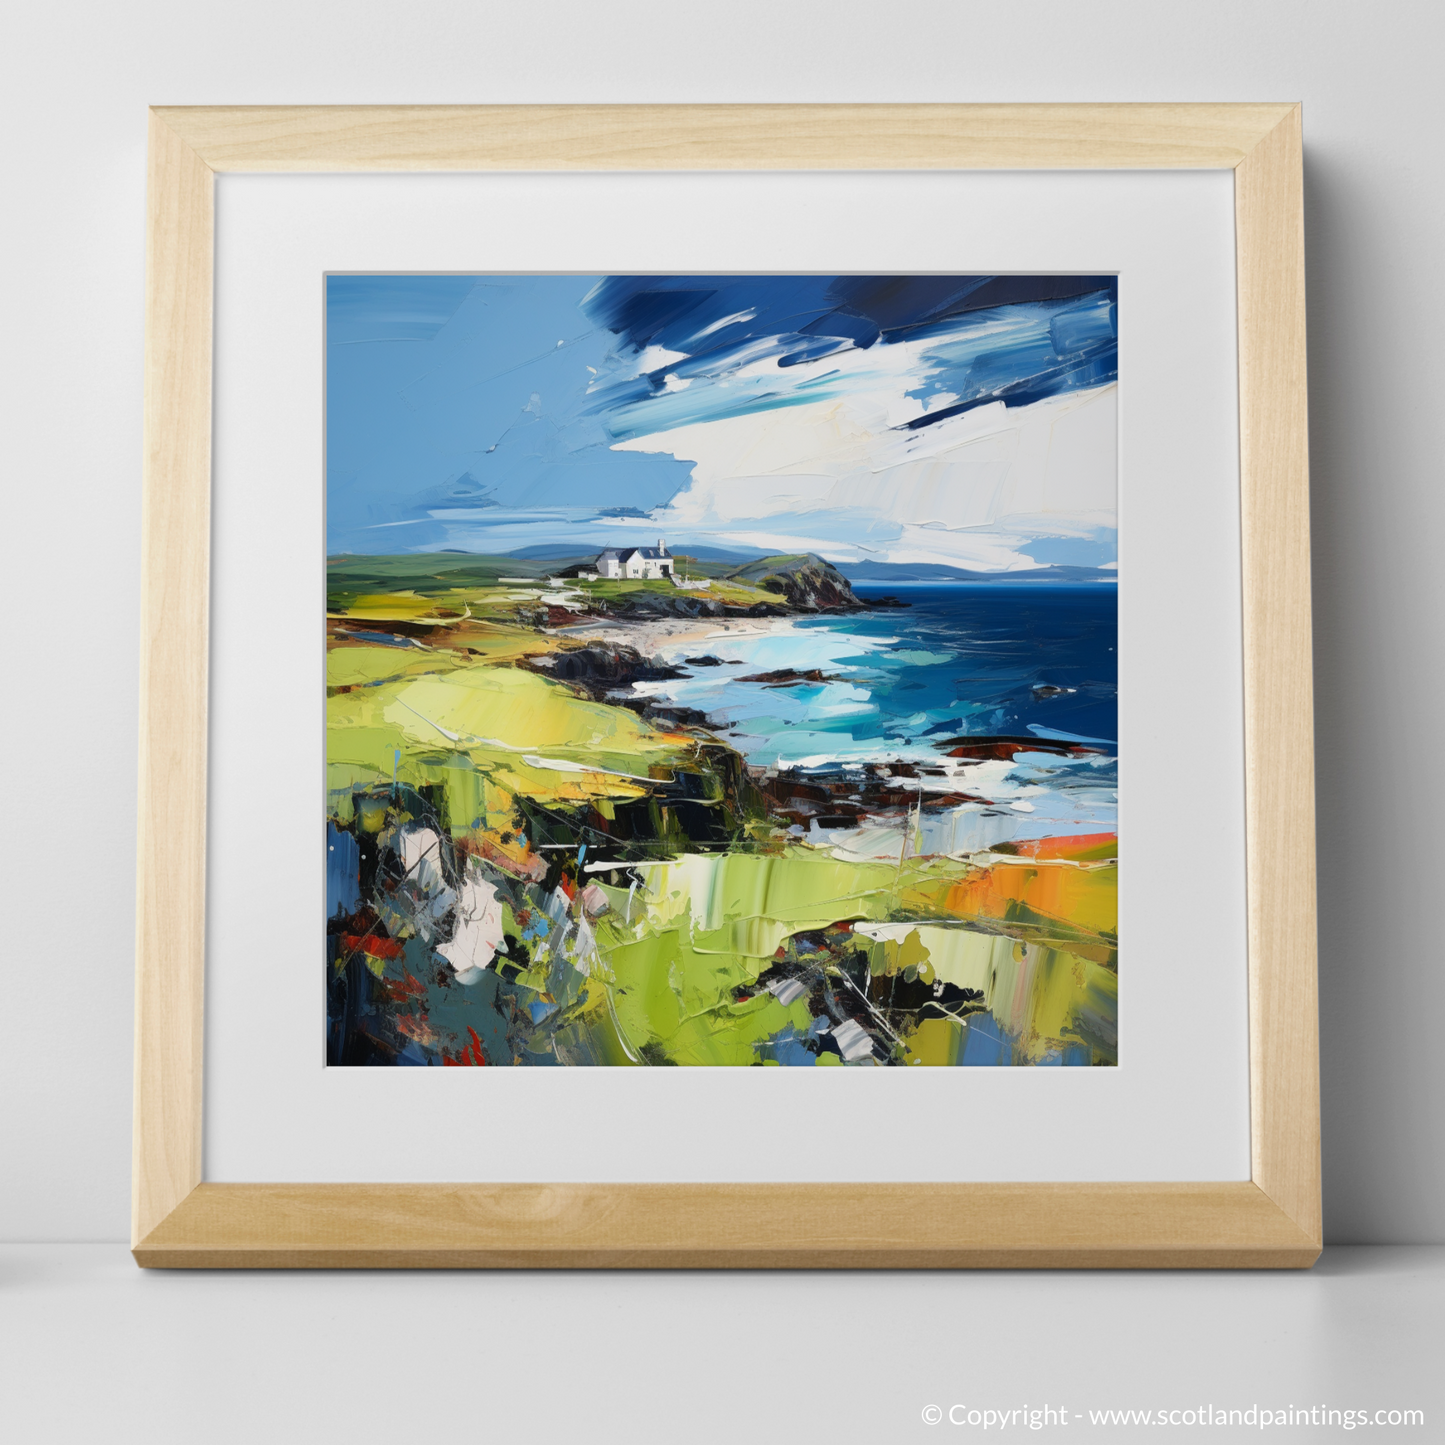 Art Print of Sound of Iona, Isle of Iona with a natural frame